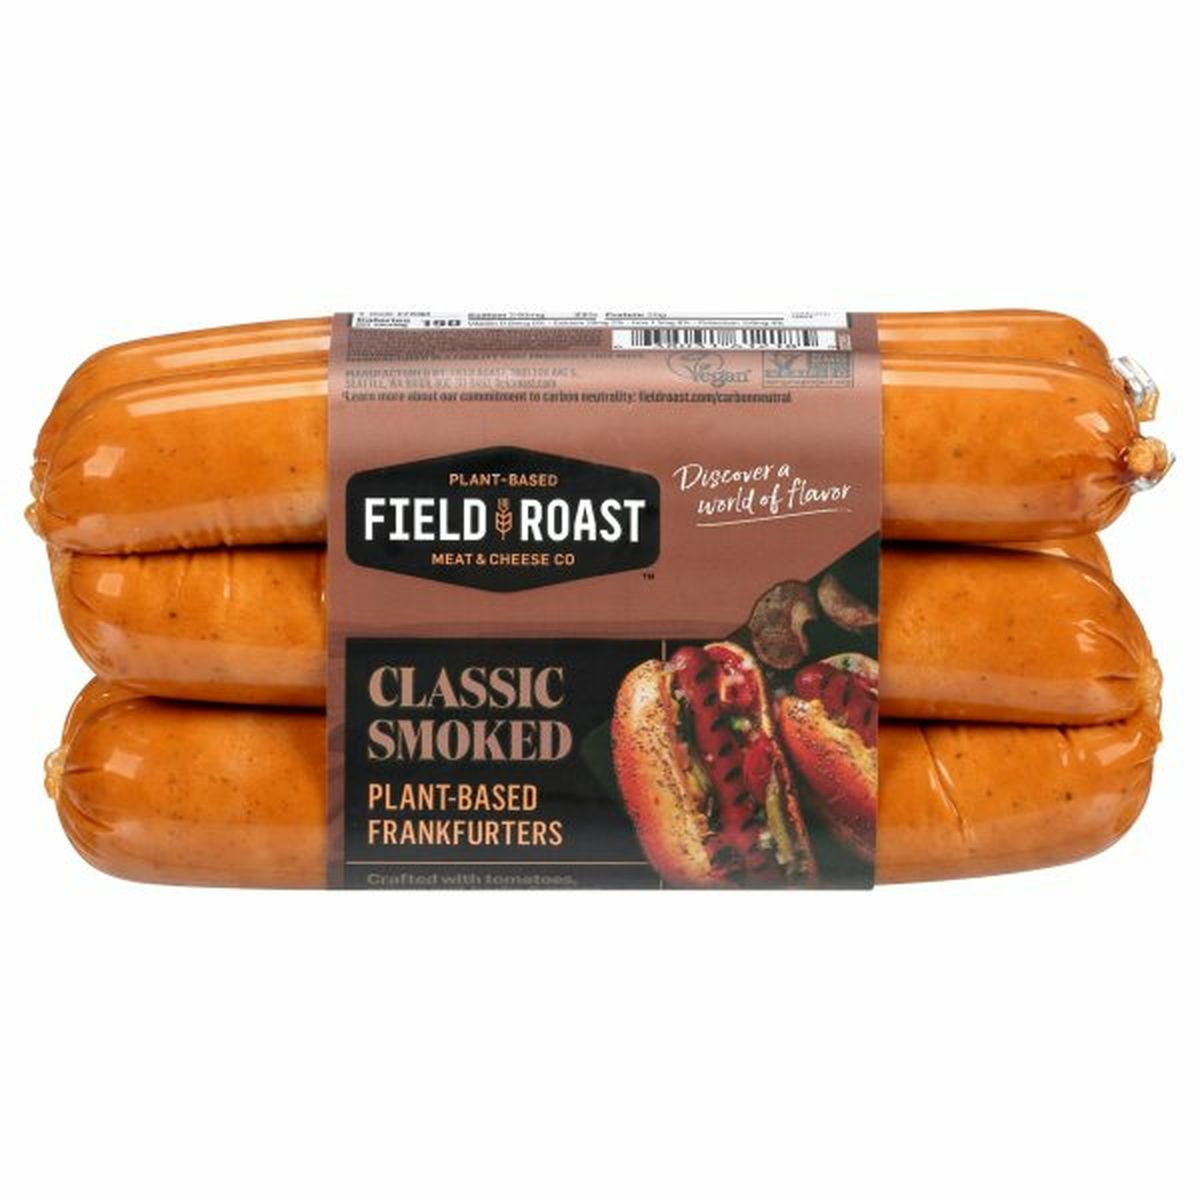 Calories in Field Roast Frankfurters, Classic Smoked, Plant-Based